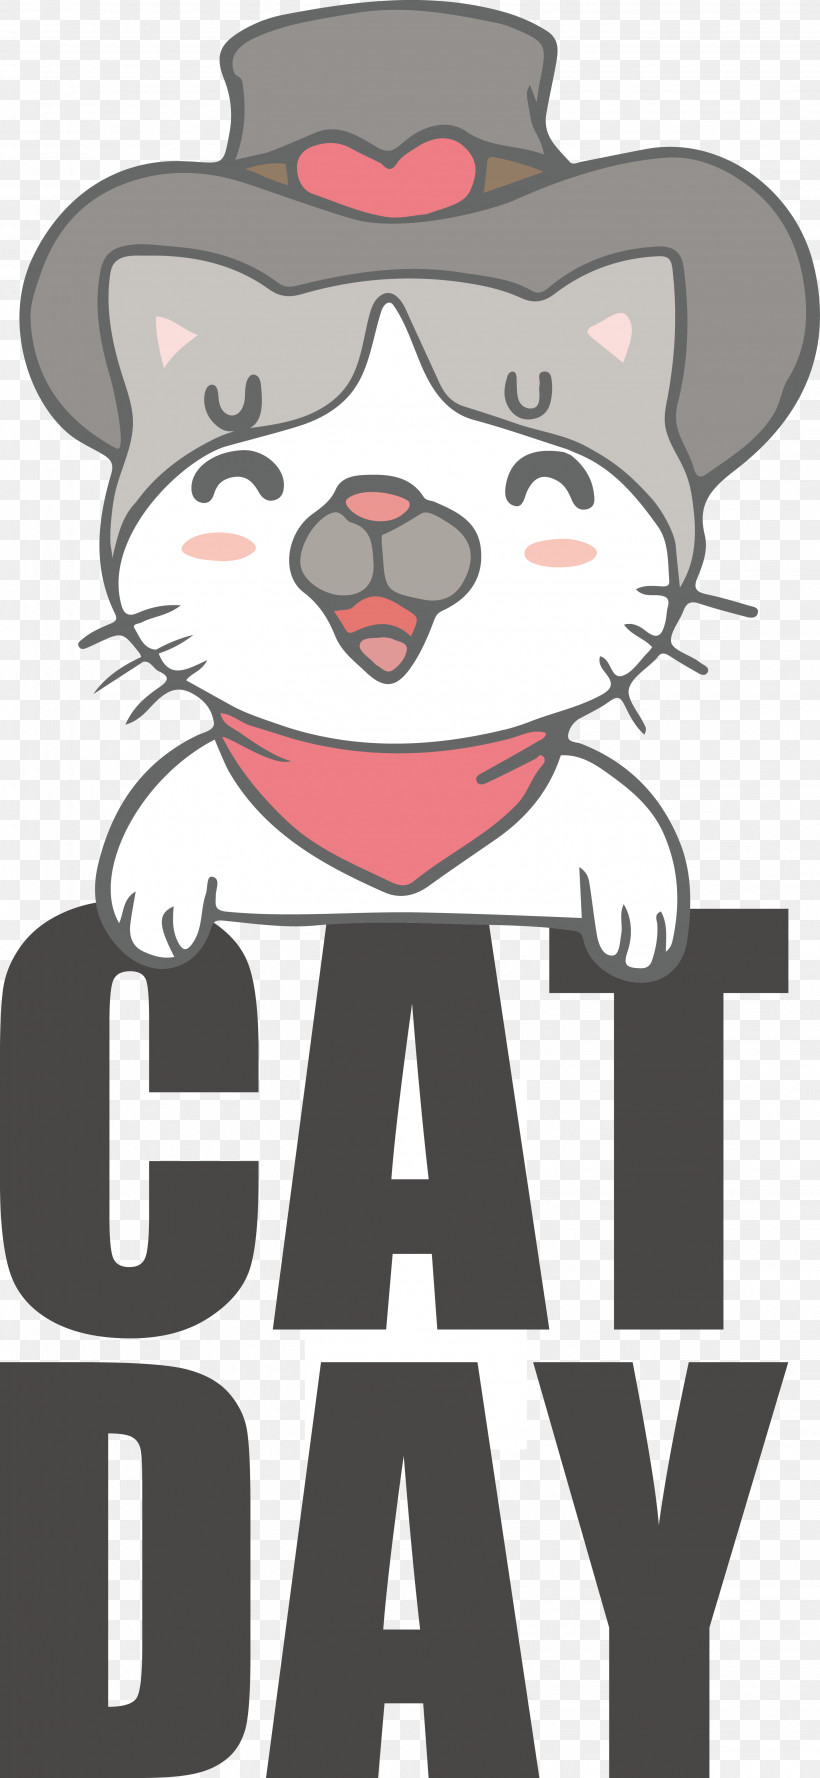 Cat Day National Cat Day, PNG, 2879x6243px, Cat Day, National Cat Day Download Free